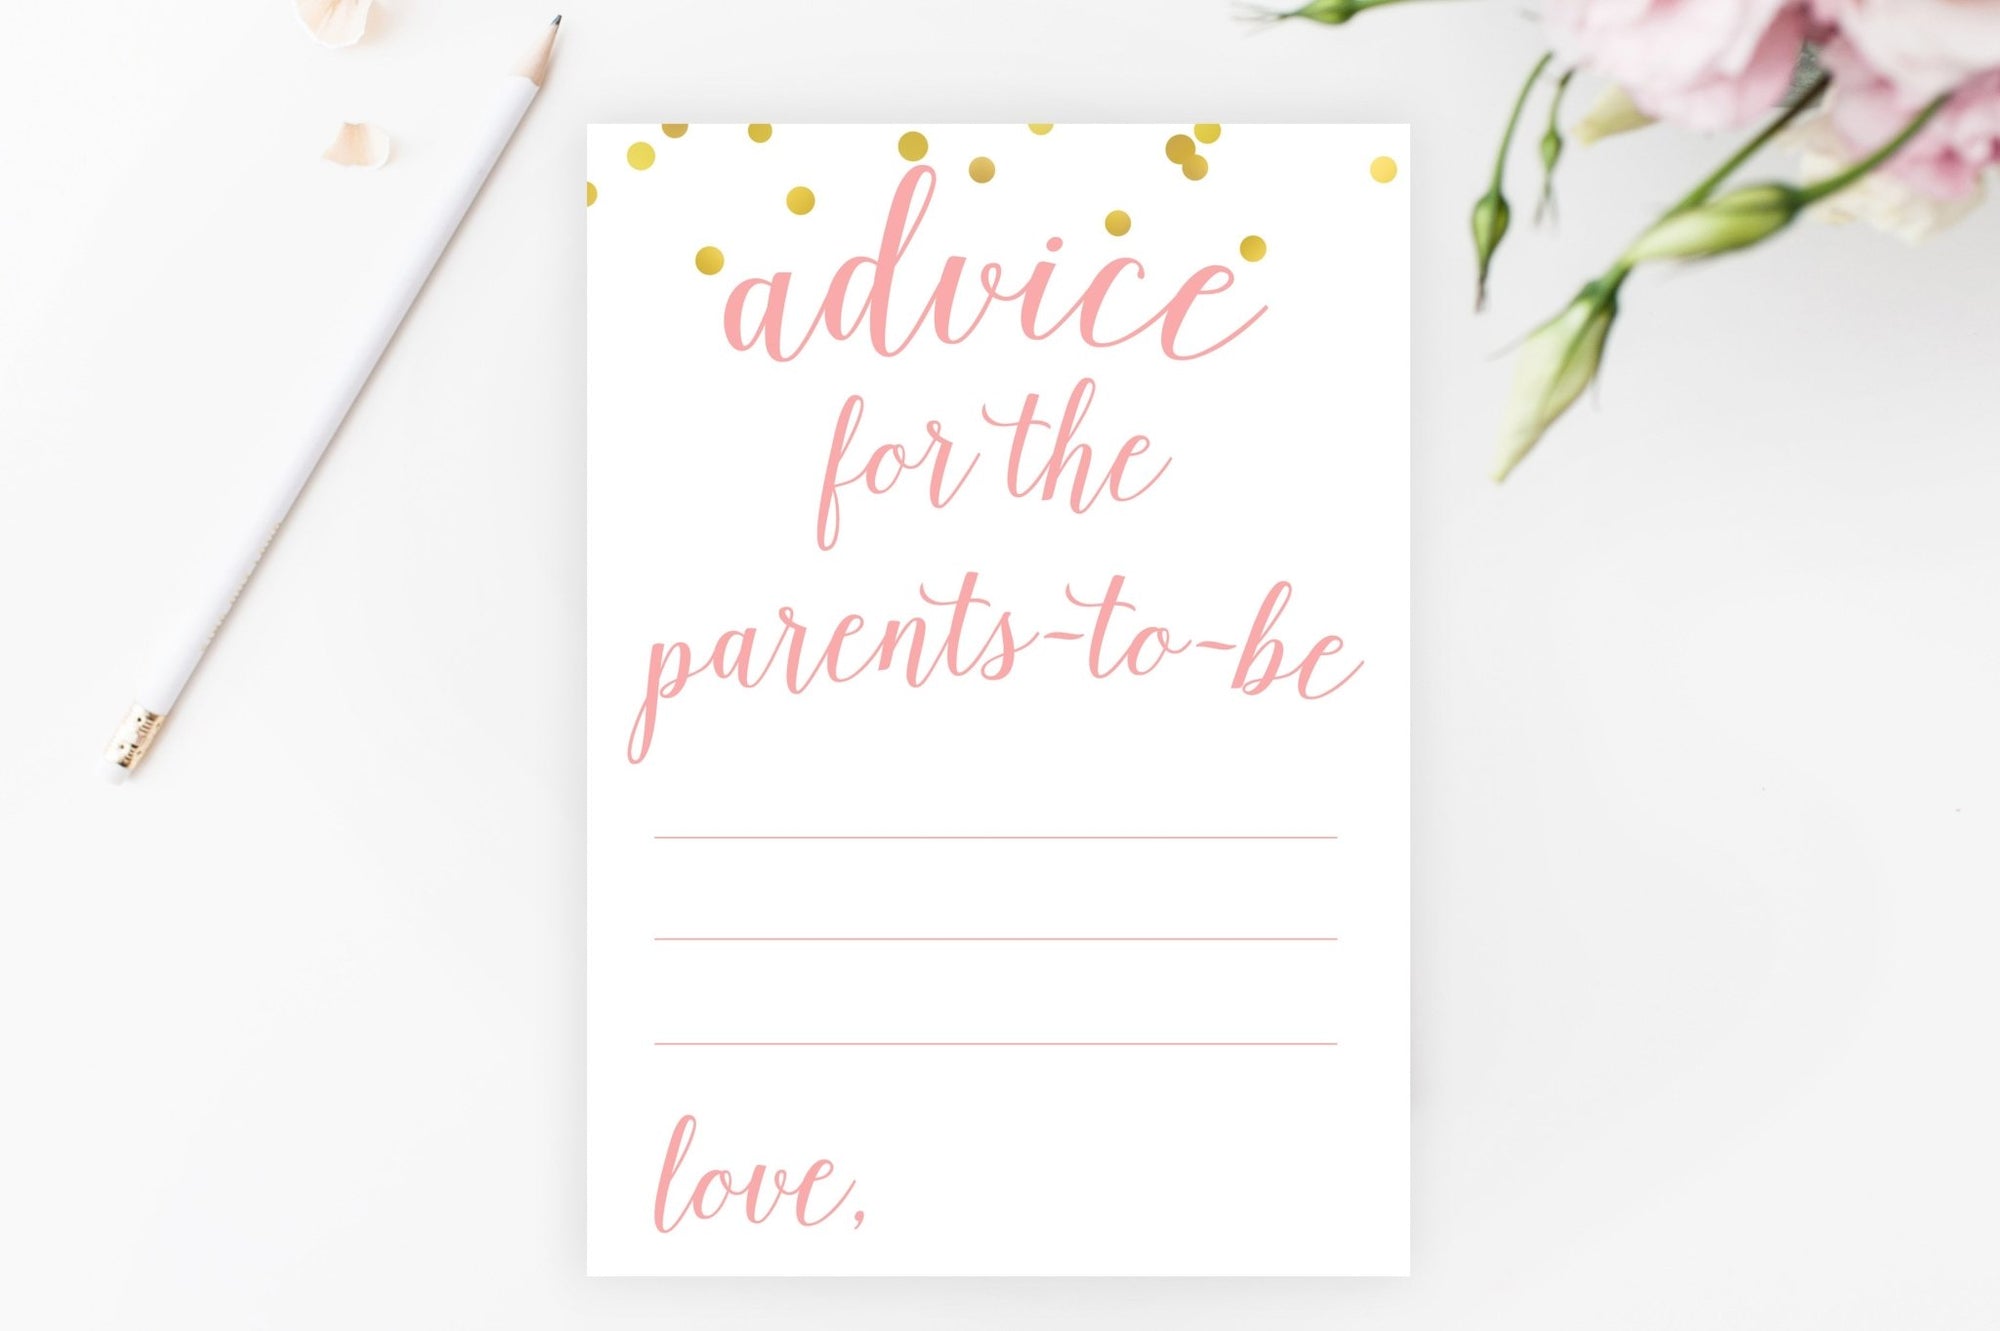 Advice for Parents-To-Be - Pink & Gold Confetti Printable - Pretty Collected